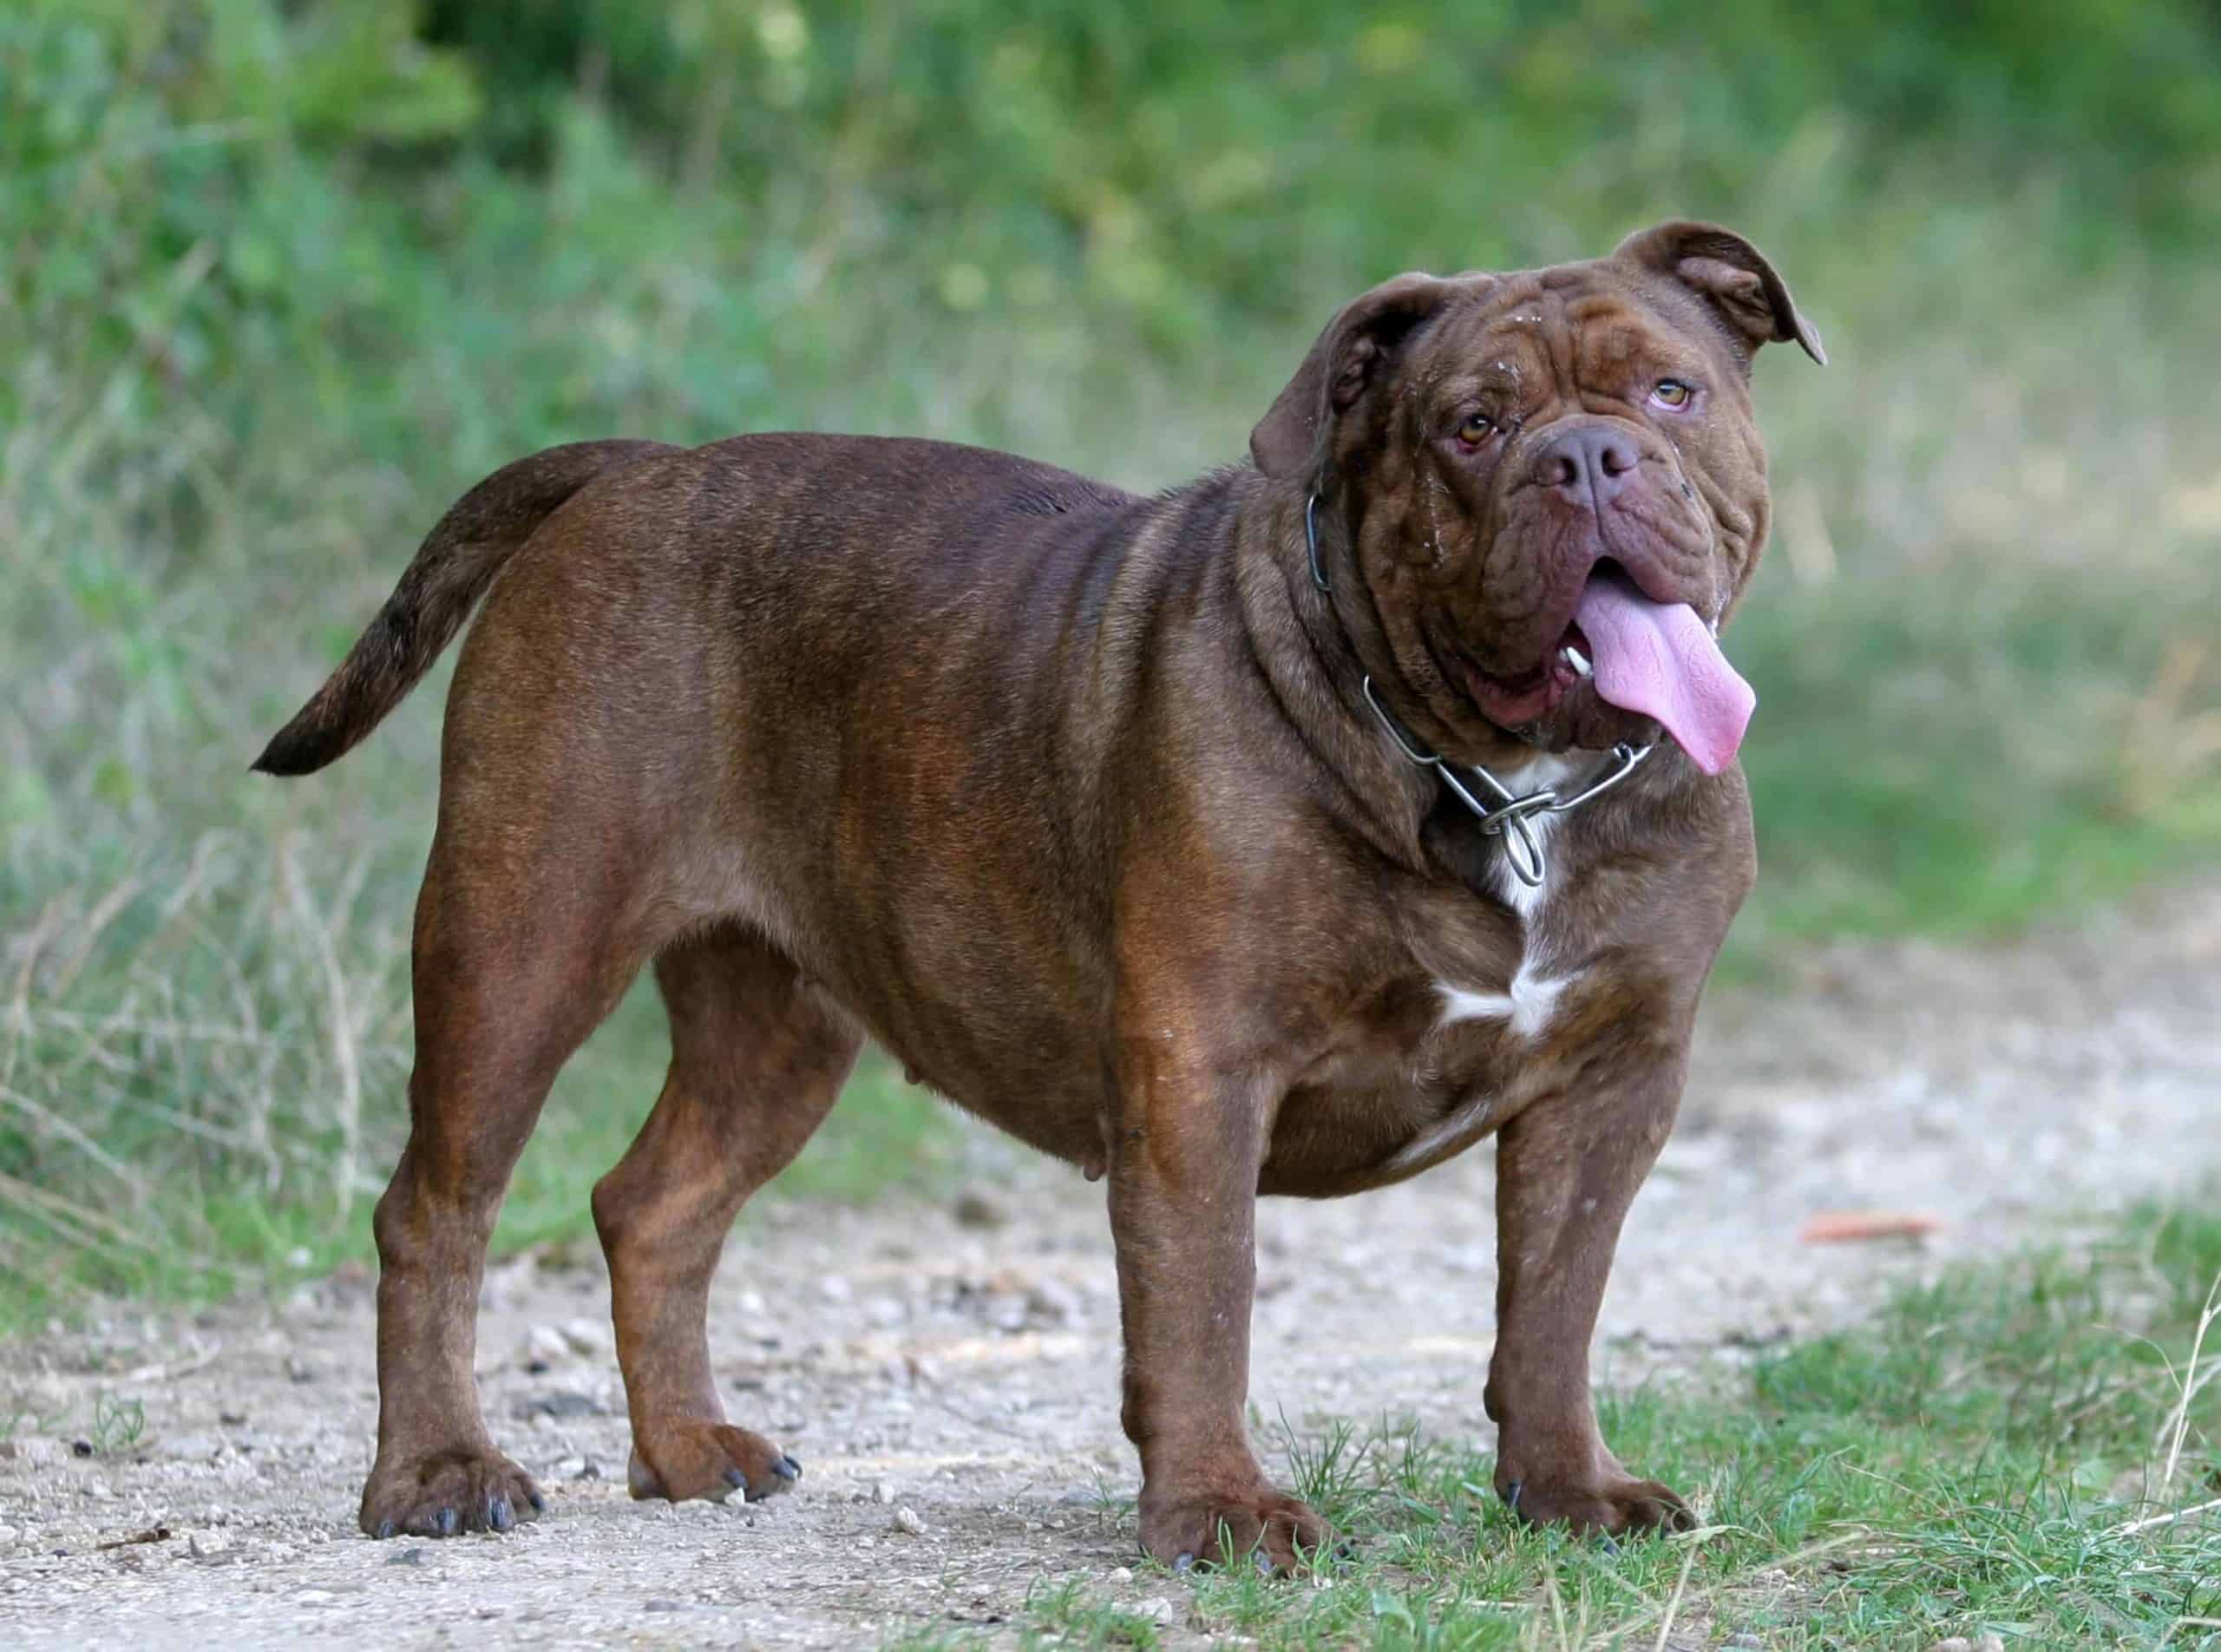 Olde English Bulldogge stands outside. The Olde English Bulldogge is a direct descendant of the English bulldog and is one of eight bulldog breeds. The dogs were bred to be a healthier and athletic version of the bulldog.